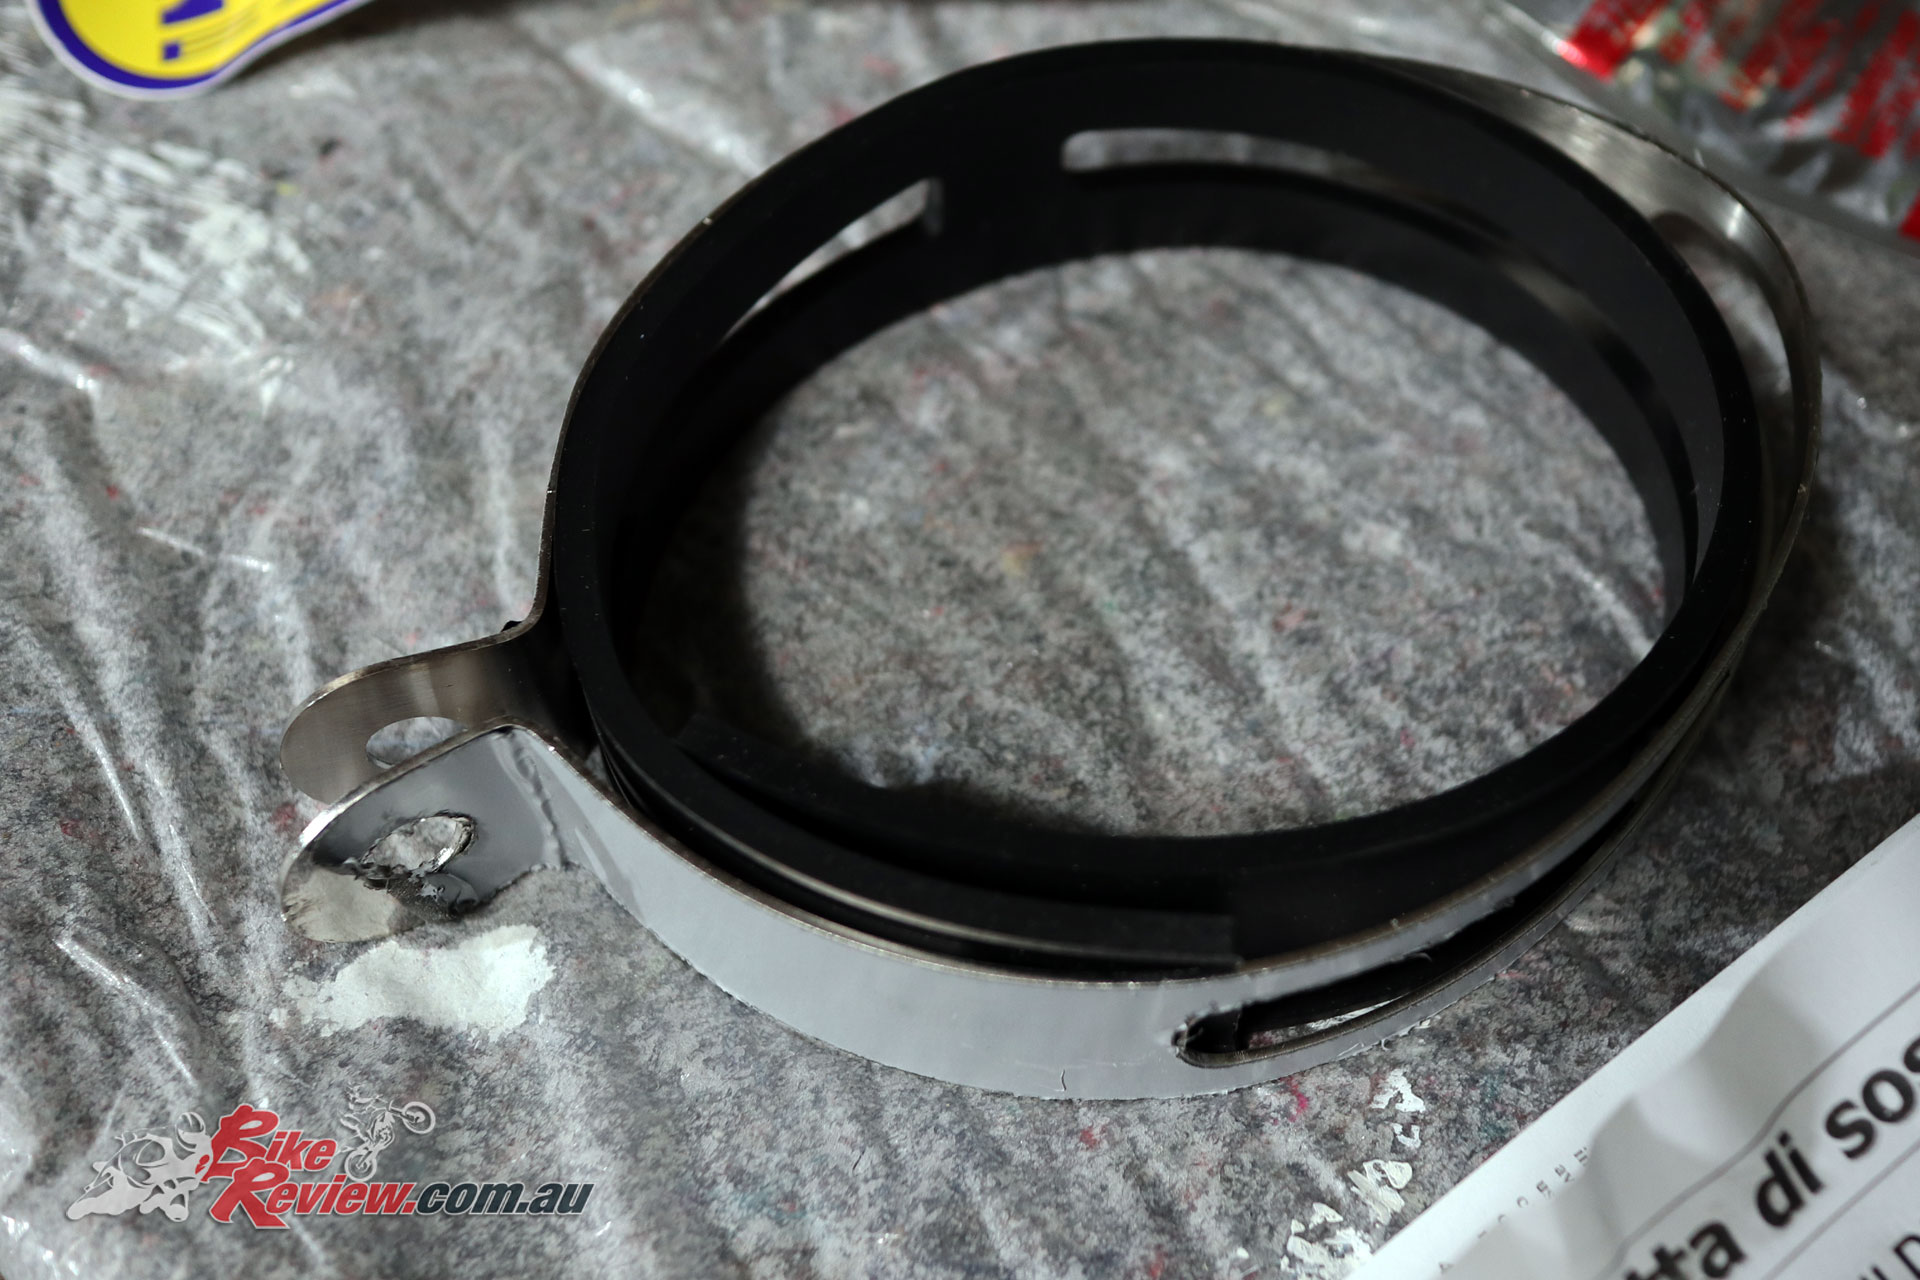 The exhaust clamp comes with excess rubber that prevents it damaging the exhaust and helps it grip the muffler body, but needs trimming to size